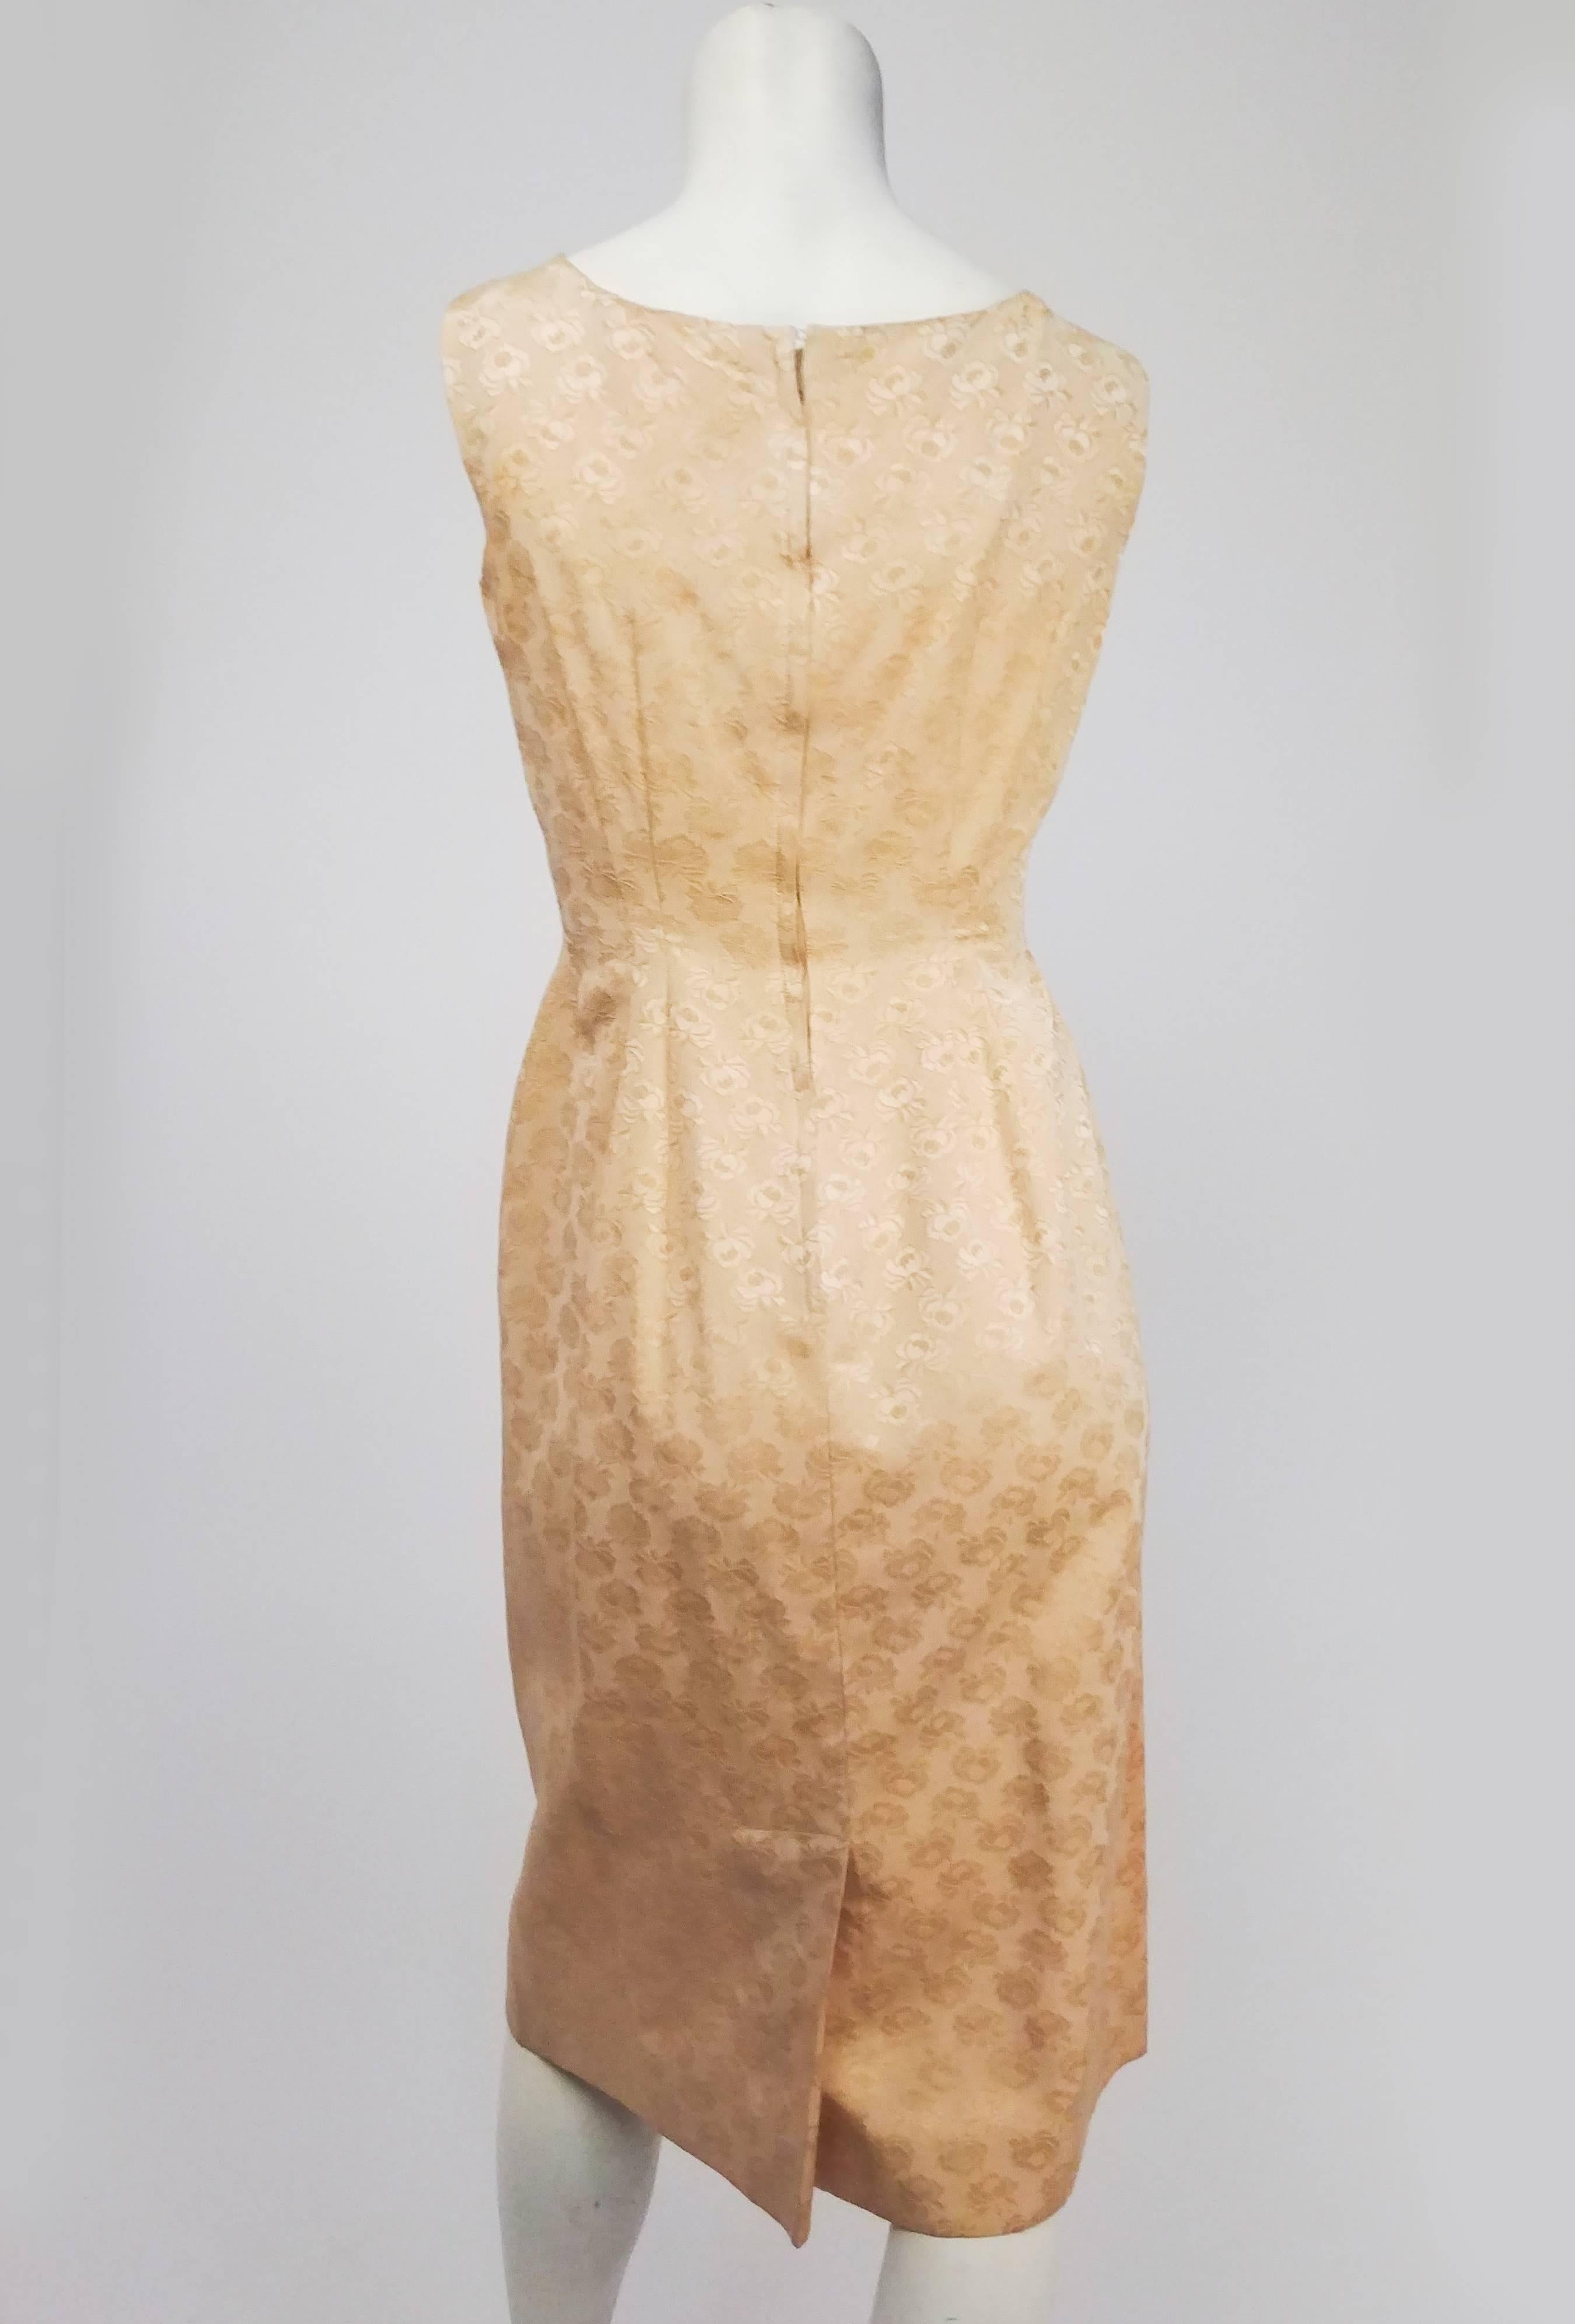 Beige Lilli Ann Yellow Rose Jacquard Cocktail Dress, 1960s For Sale